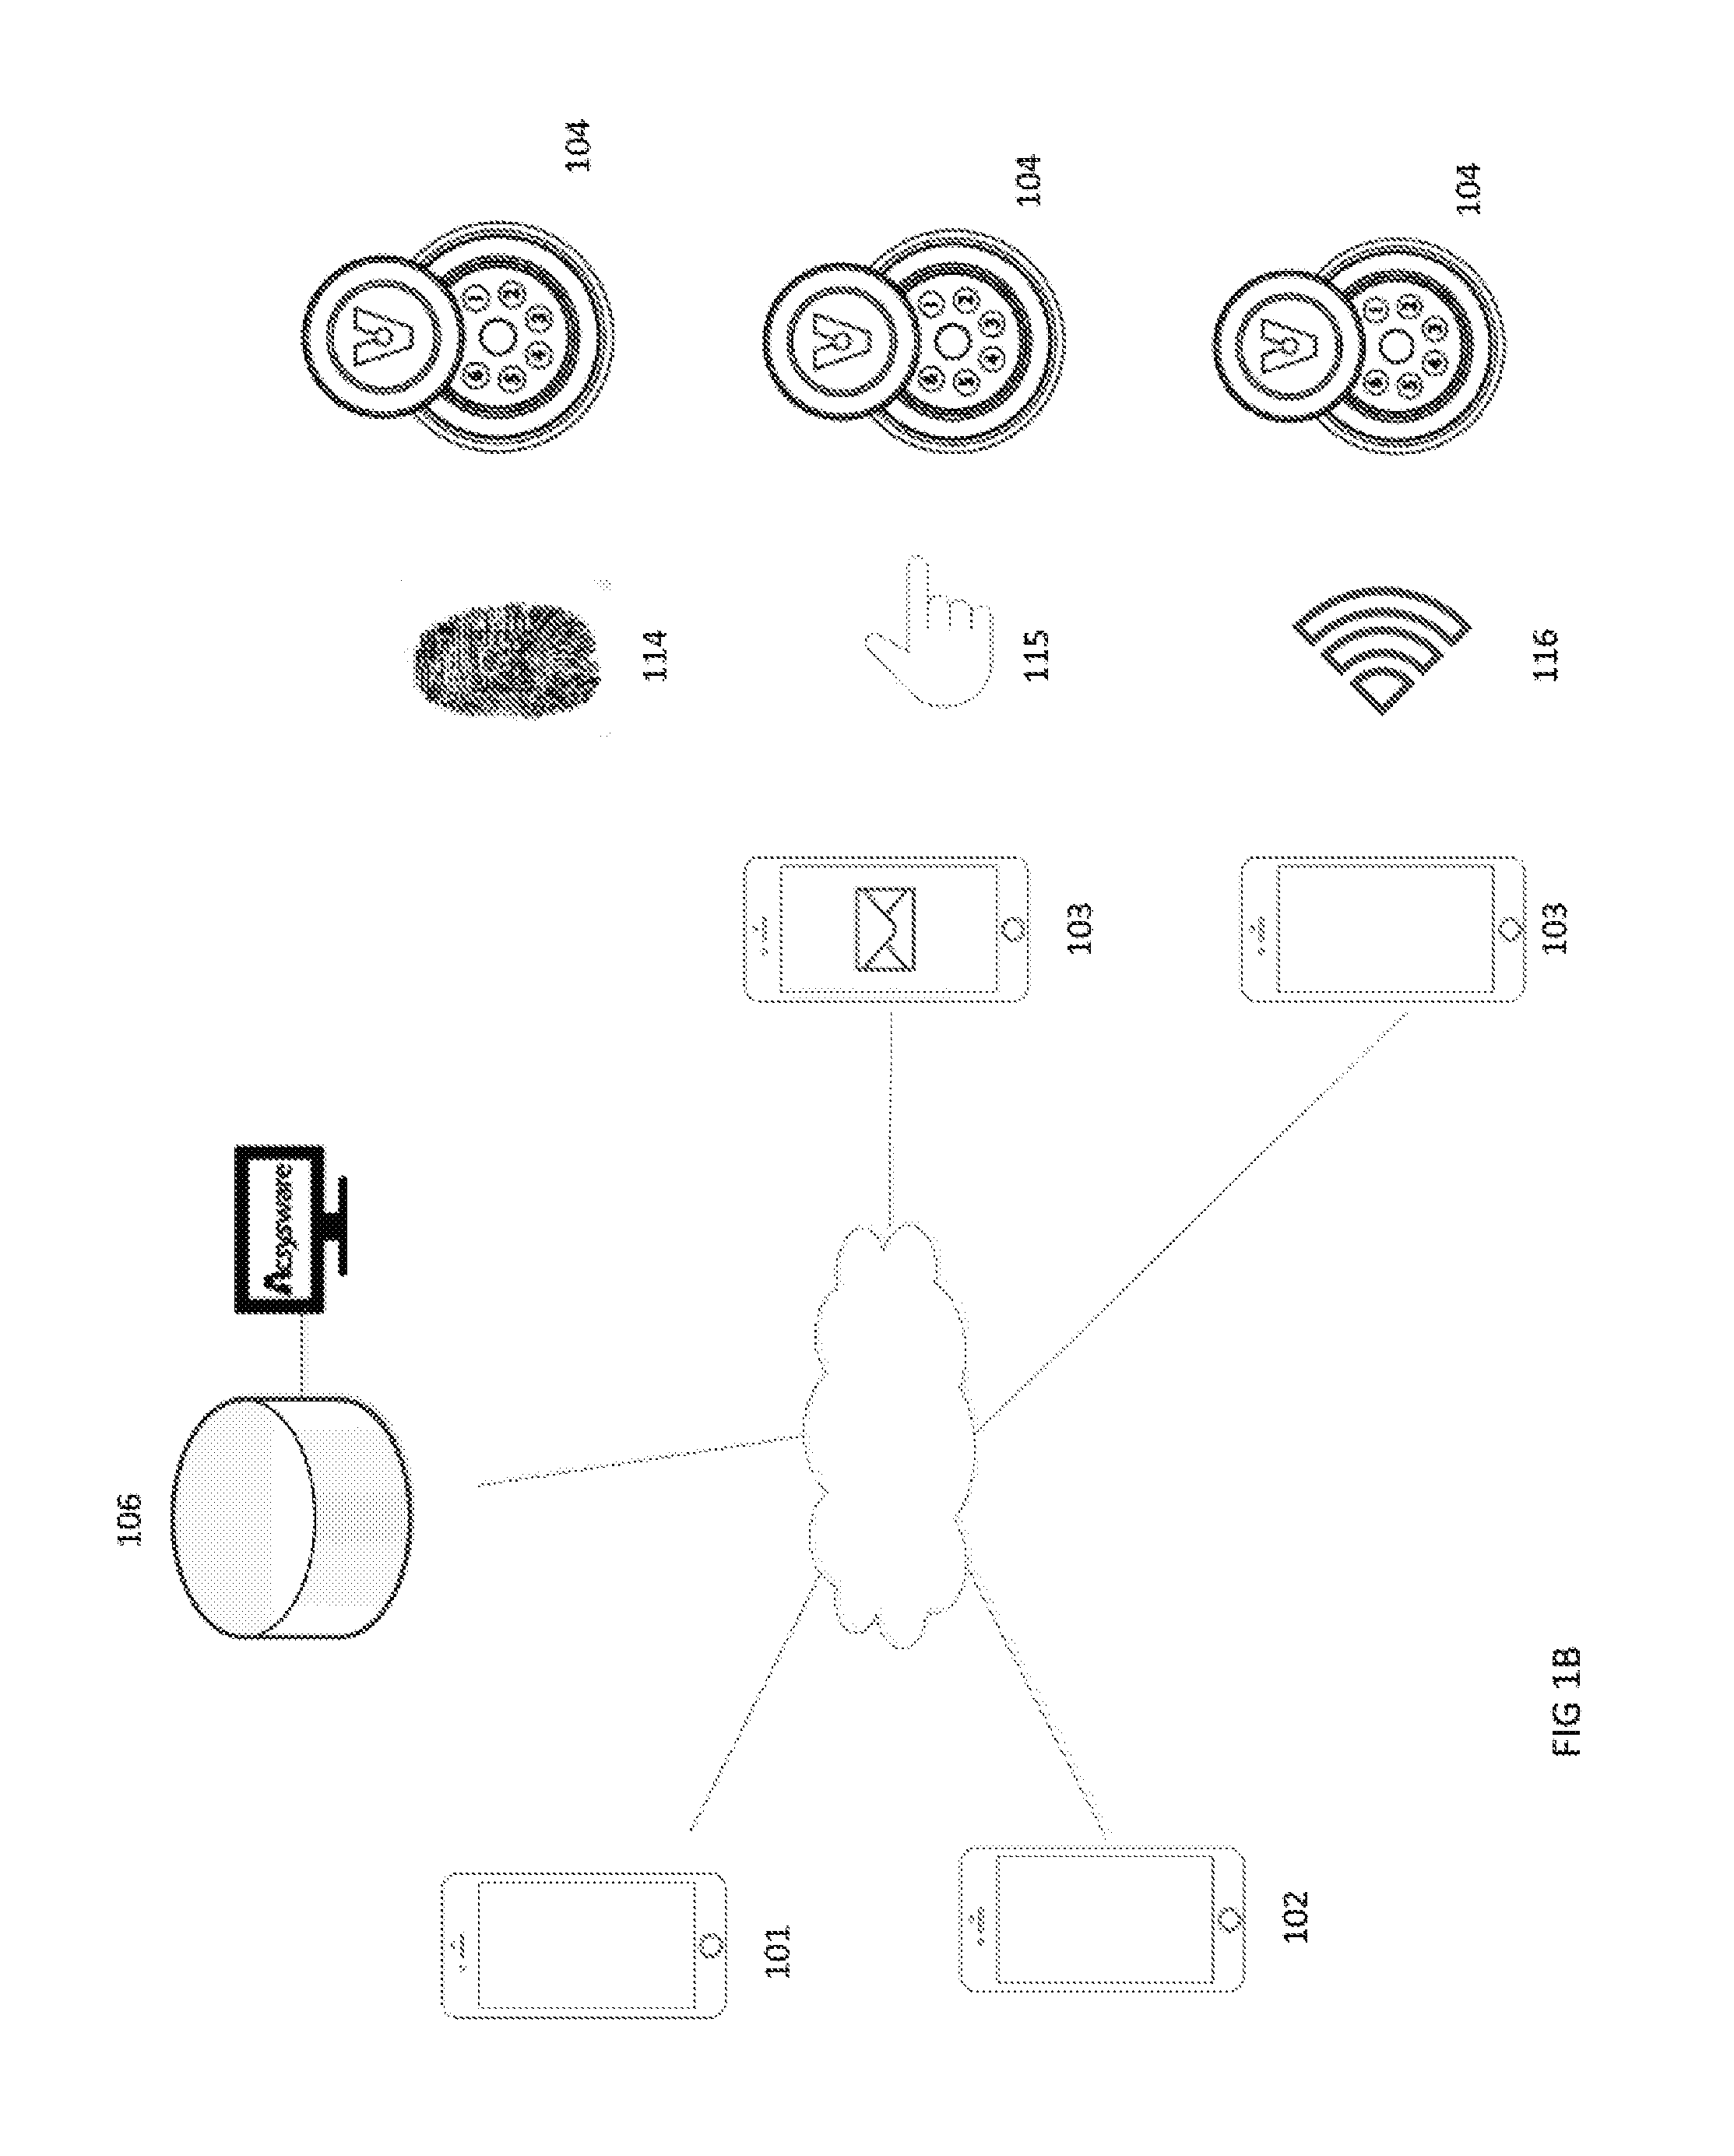 Systems and methods for redundant access control systems based on mobile devices